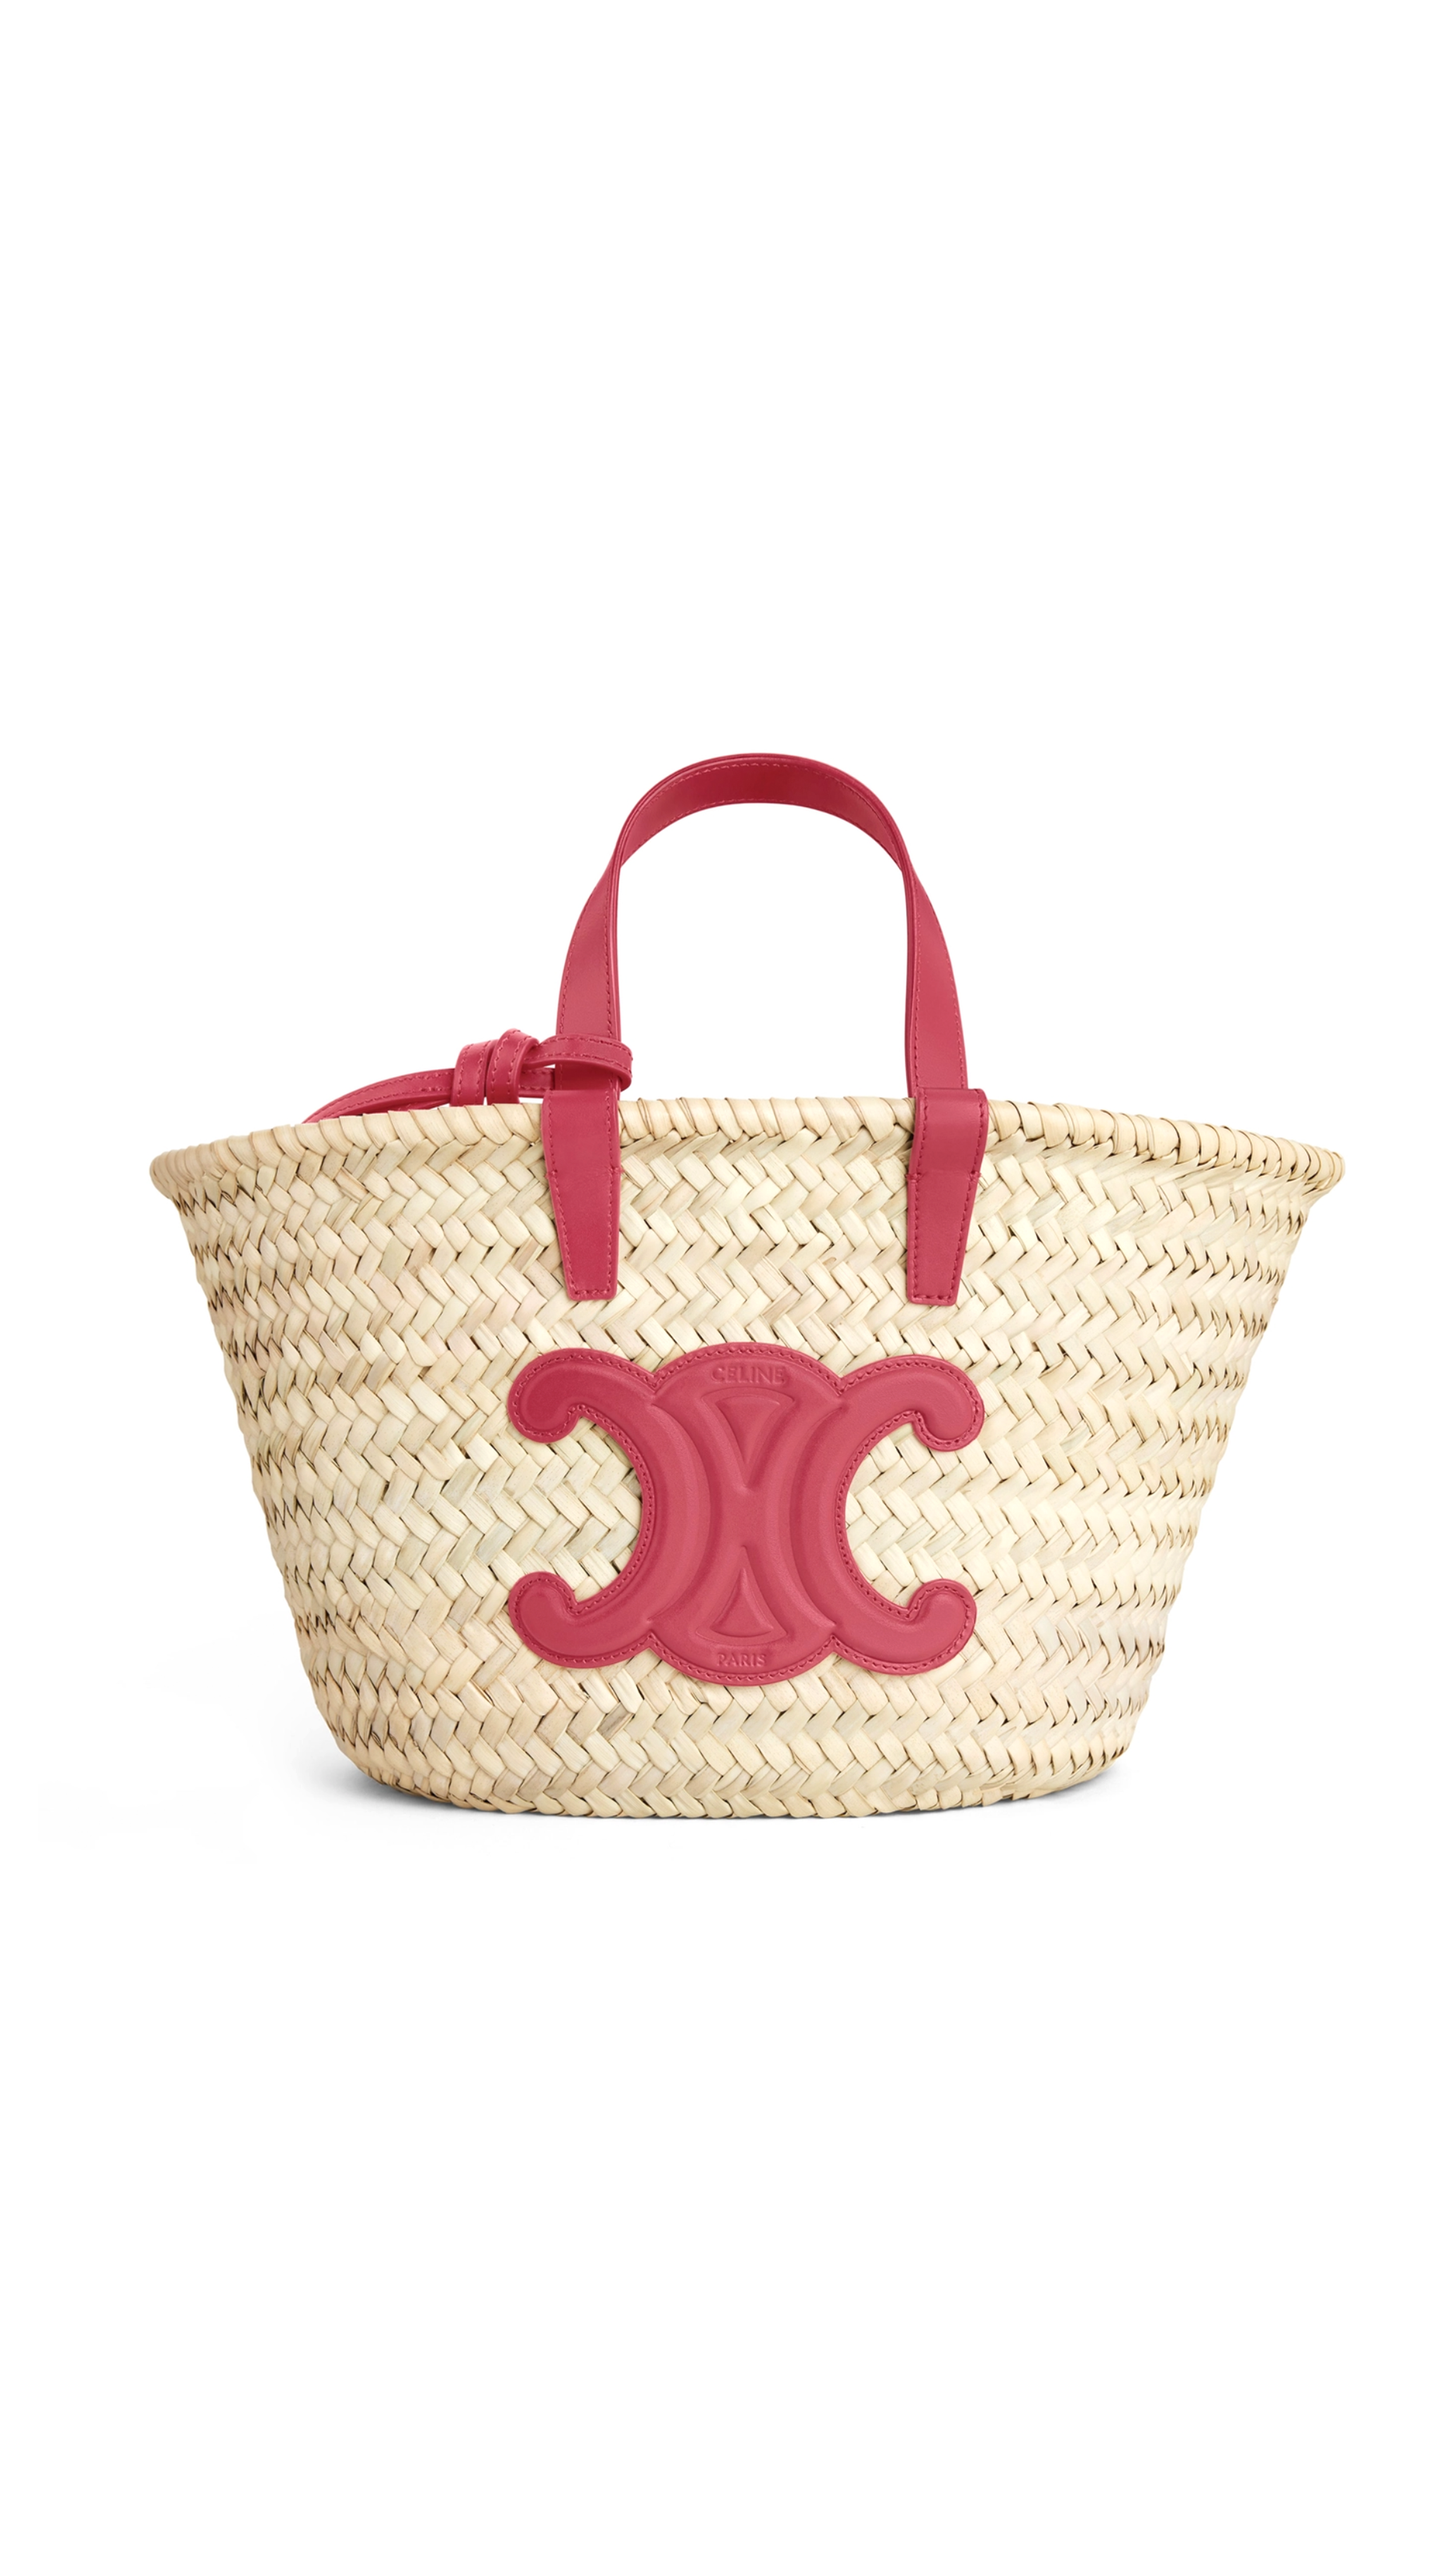 Classic Teen Panier Triomphe in Palm Leaves and Calfskin - Lipstick